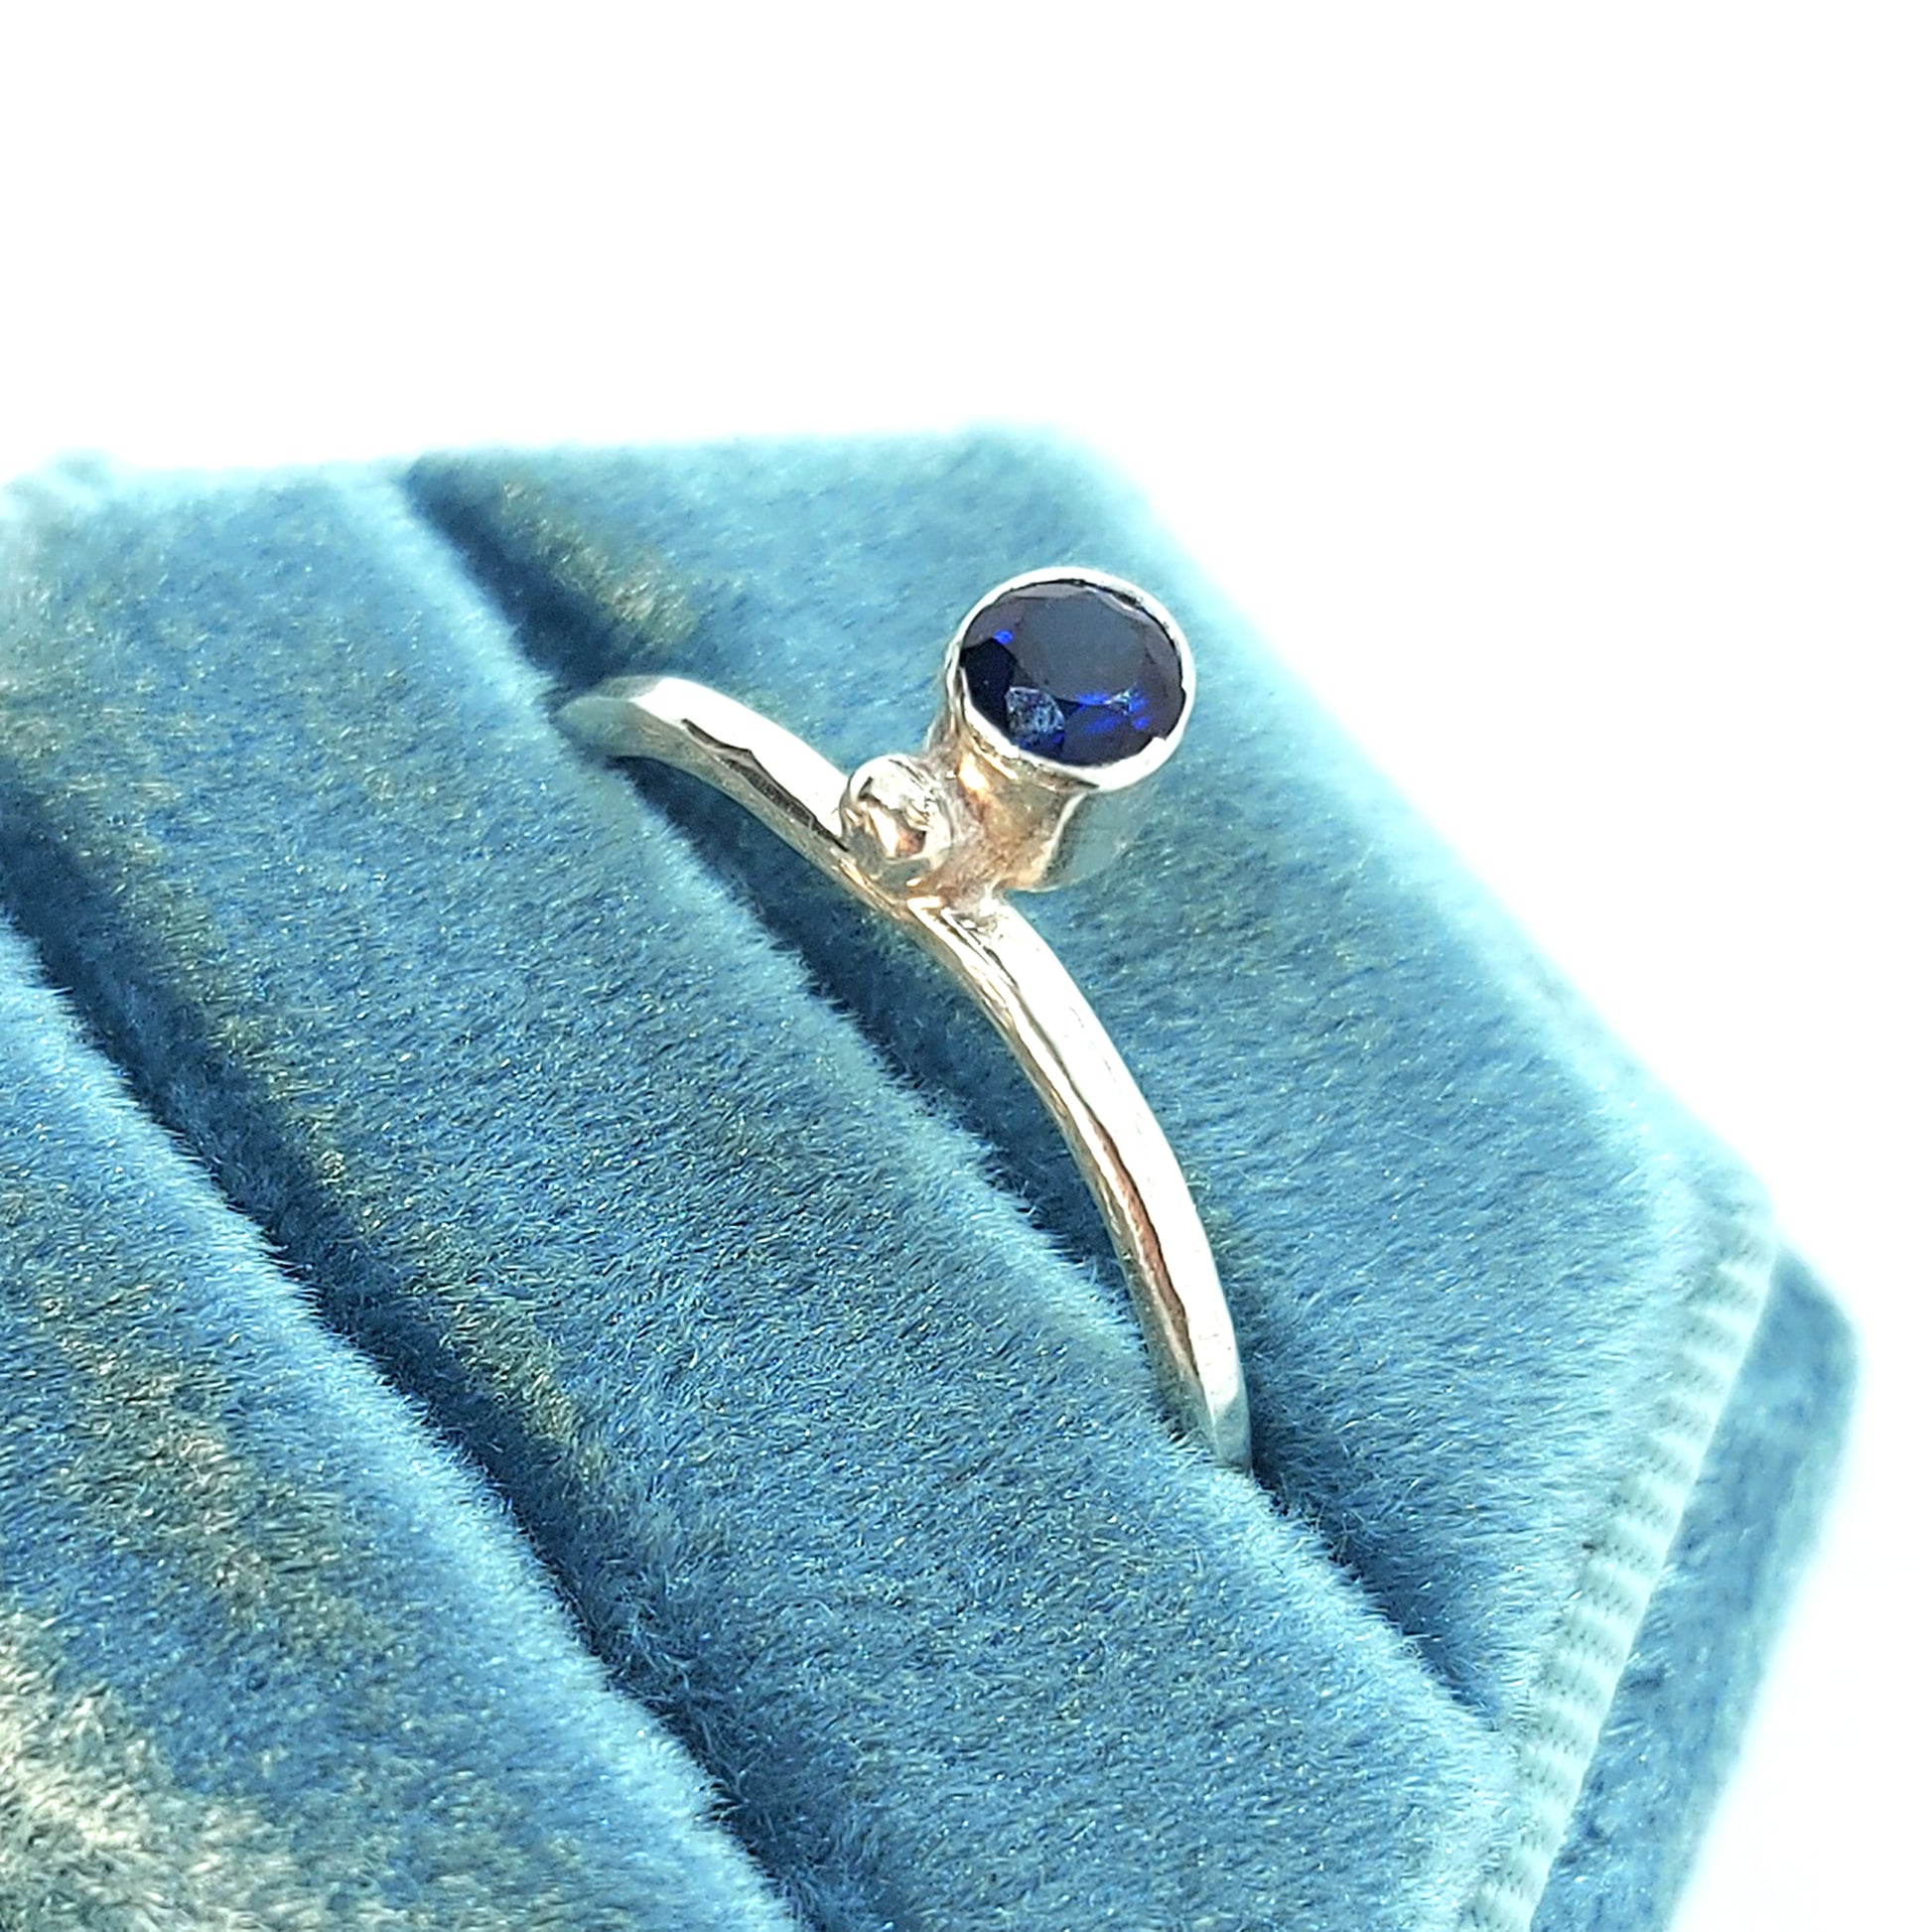 A silver thin ring with a hammered finish. The ring has a dark blue sapphire bezel set alongside a silver dot.